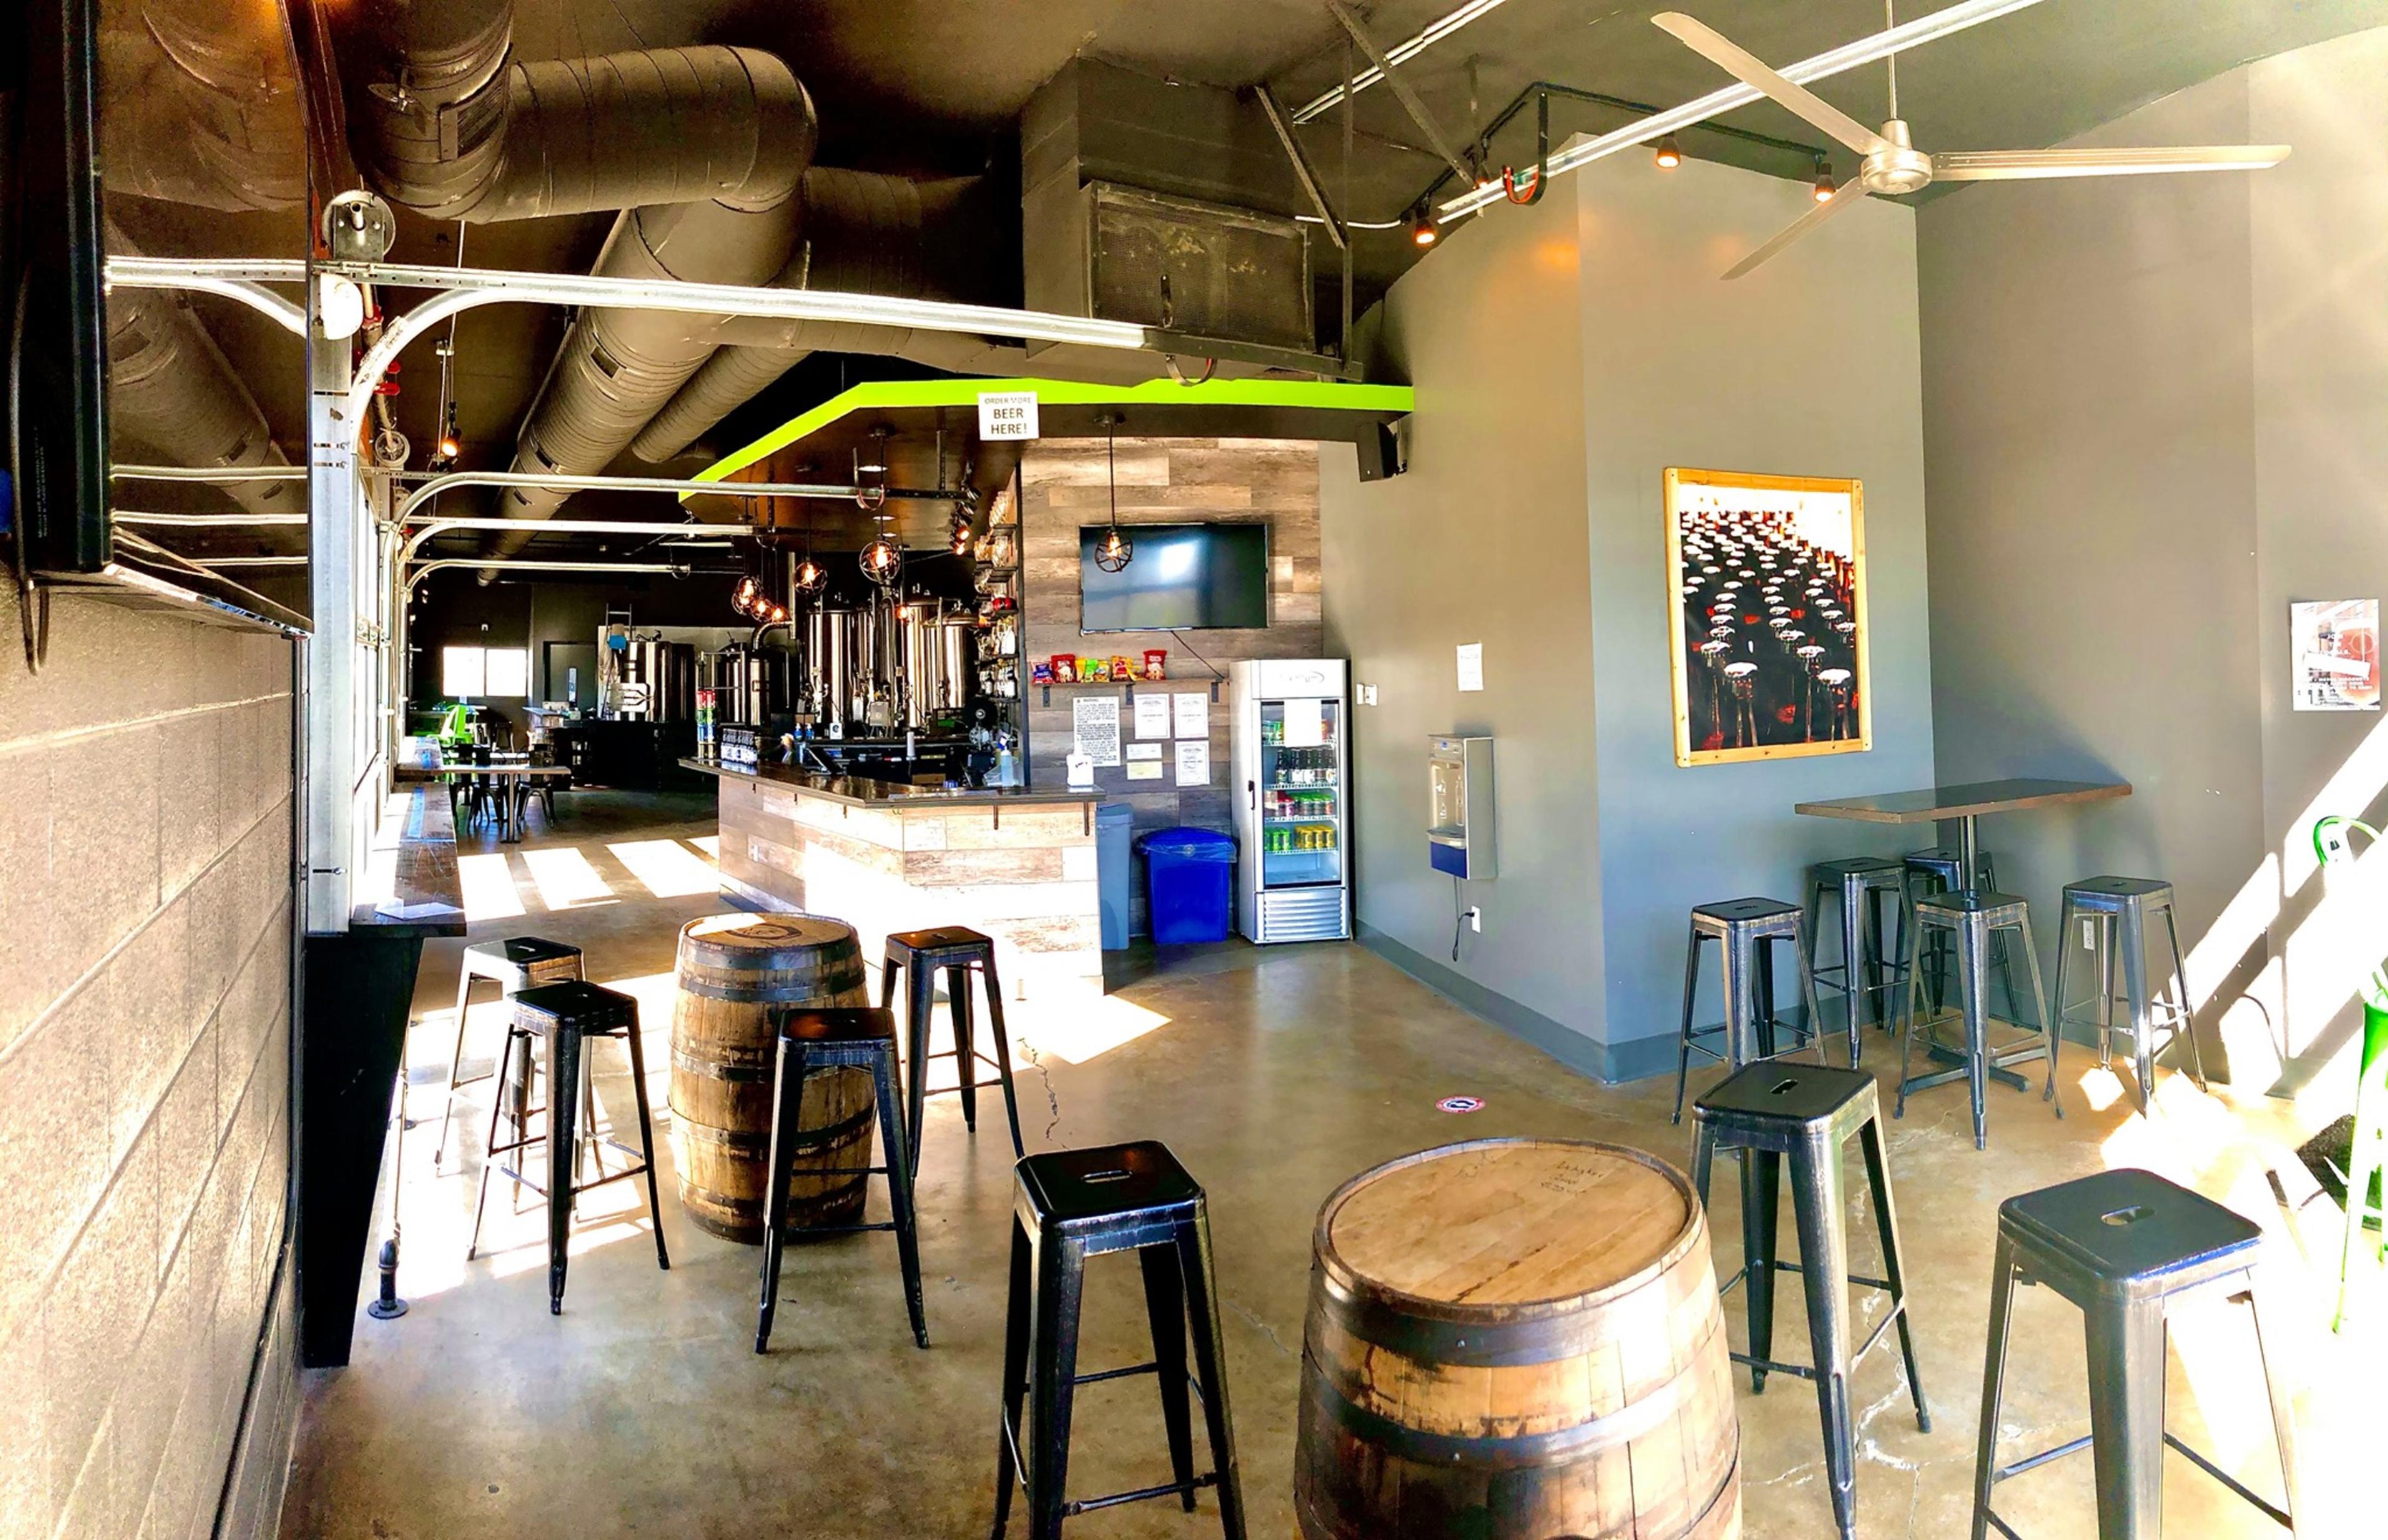 River North Brewery - Blake Street Taproom